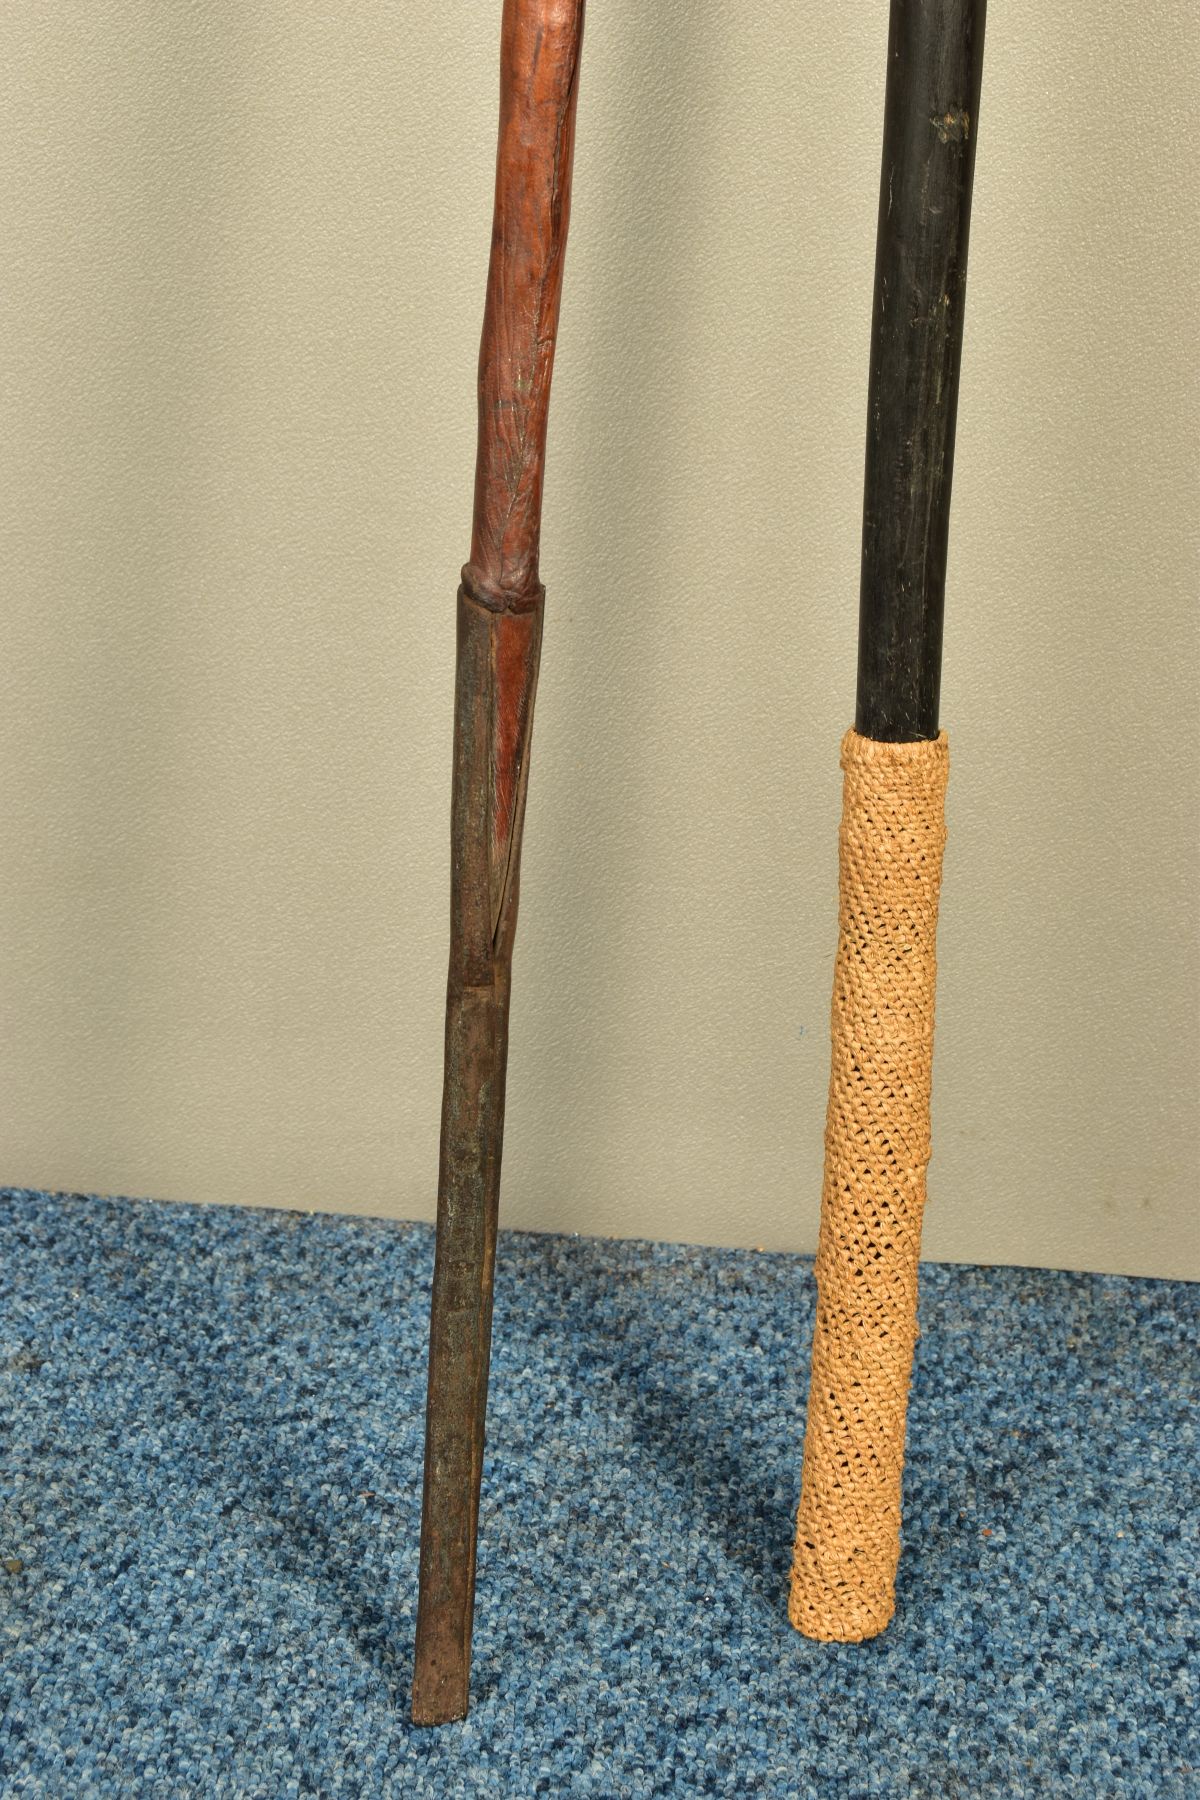 TWO PIECES OF POSSIBLY AFRICAN TRIBAL WEAPONRY, mainly wooden construction with metal parts added, - Image 5 of 9